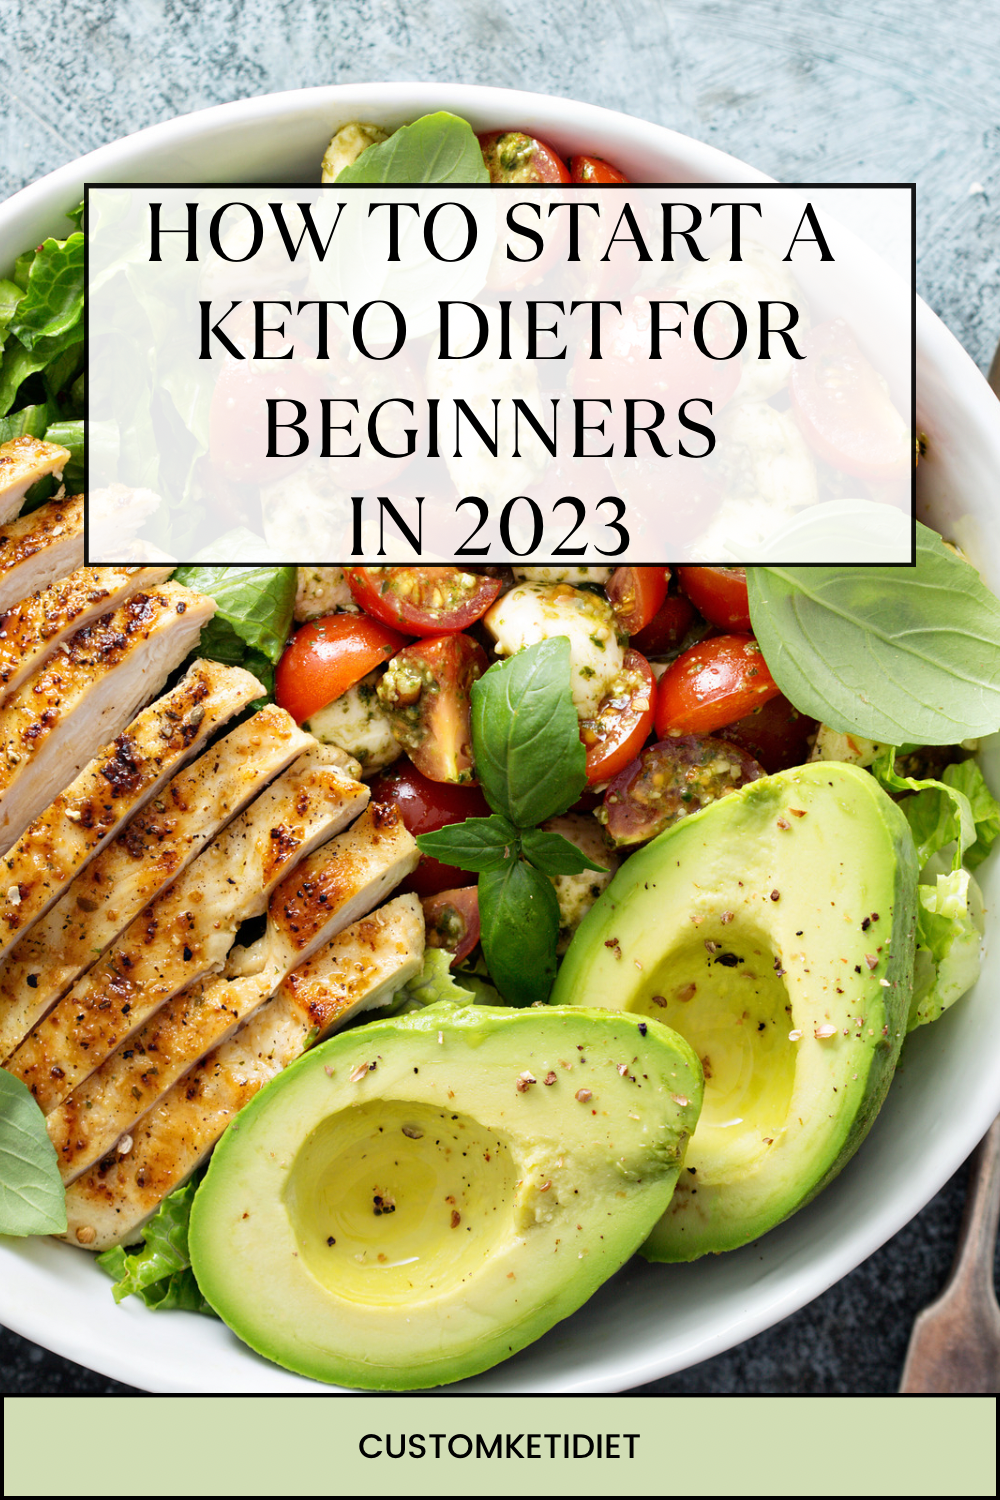 Low Carb & Keto Diet Plan: How To Start a Keto Diet